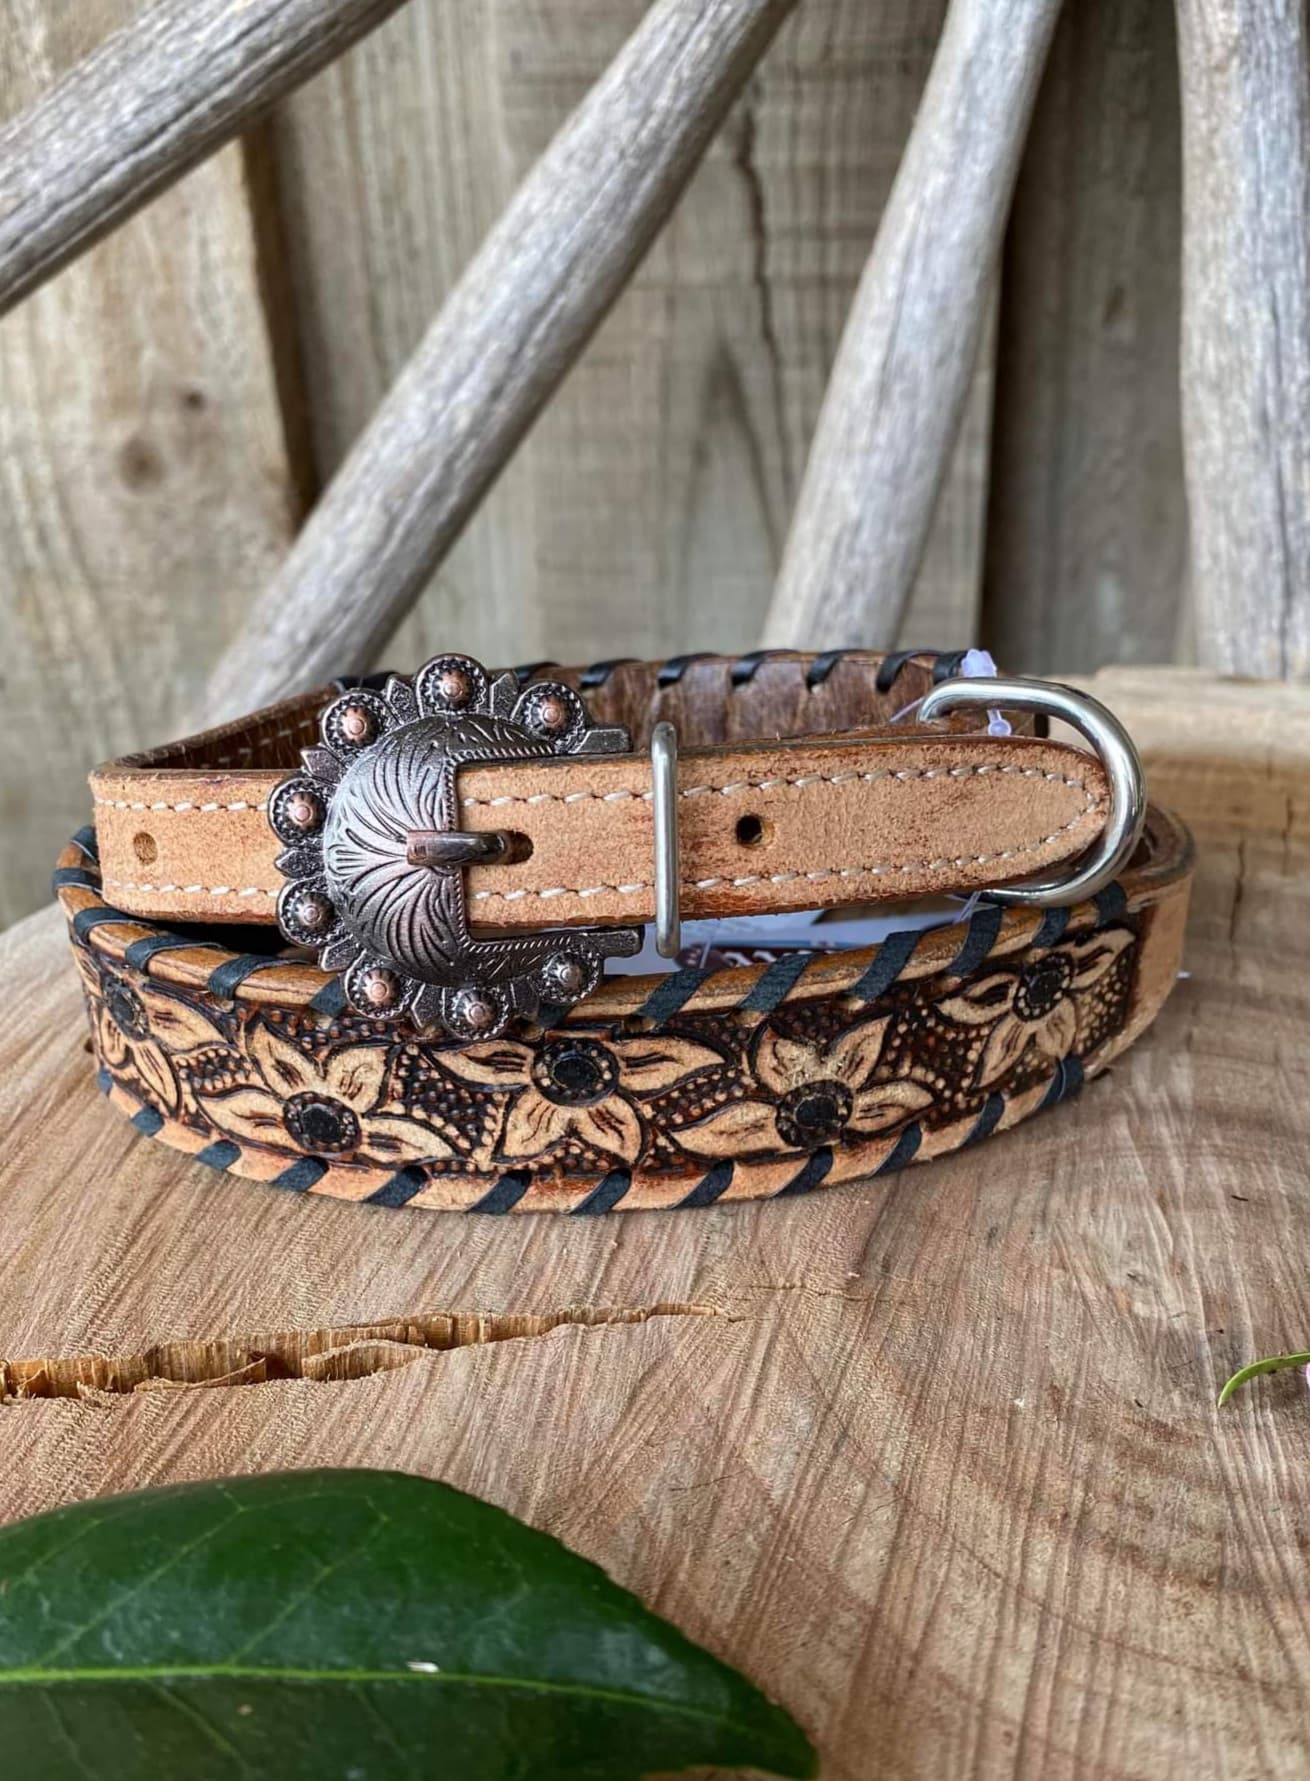 Collar -  Couture Leather Tooled Dog Collar Western Buckle DC 46